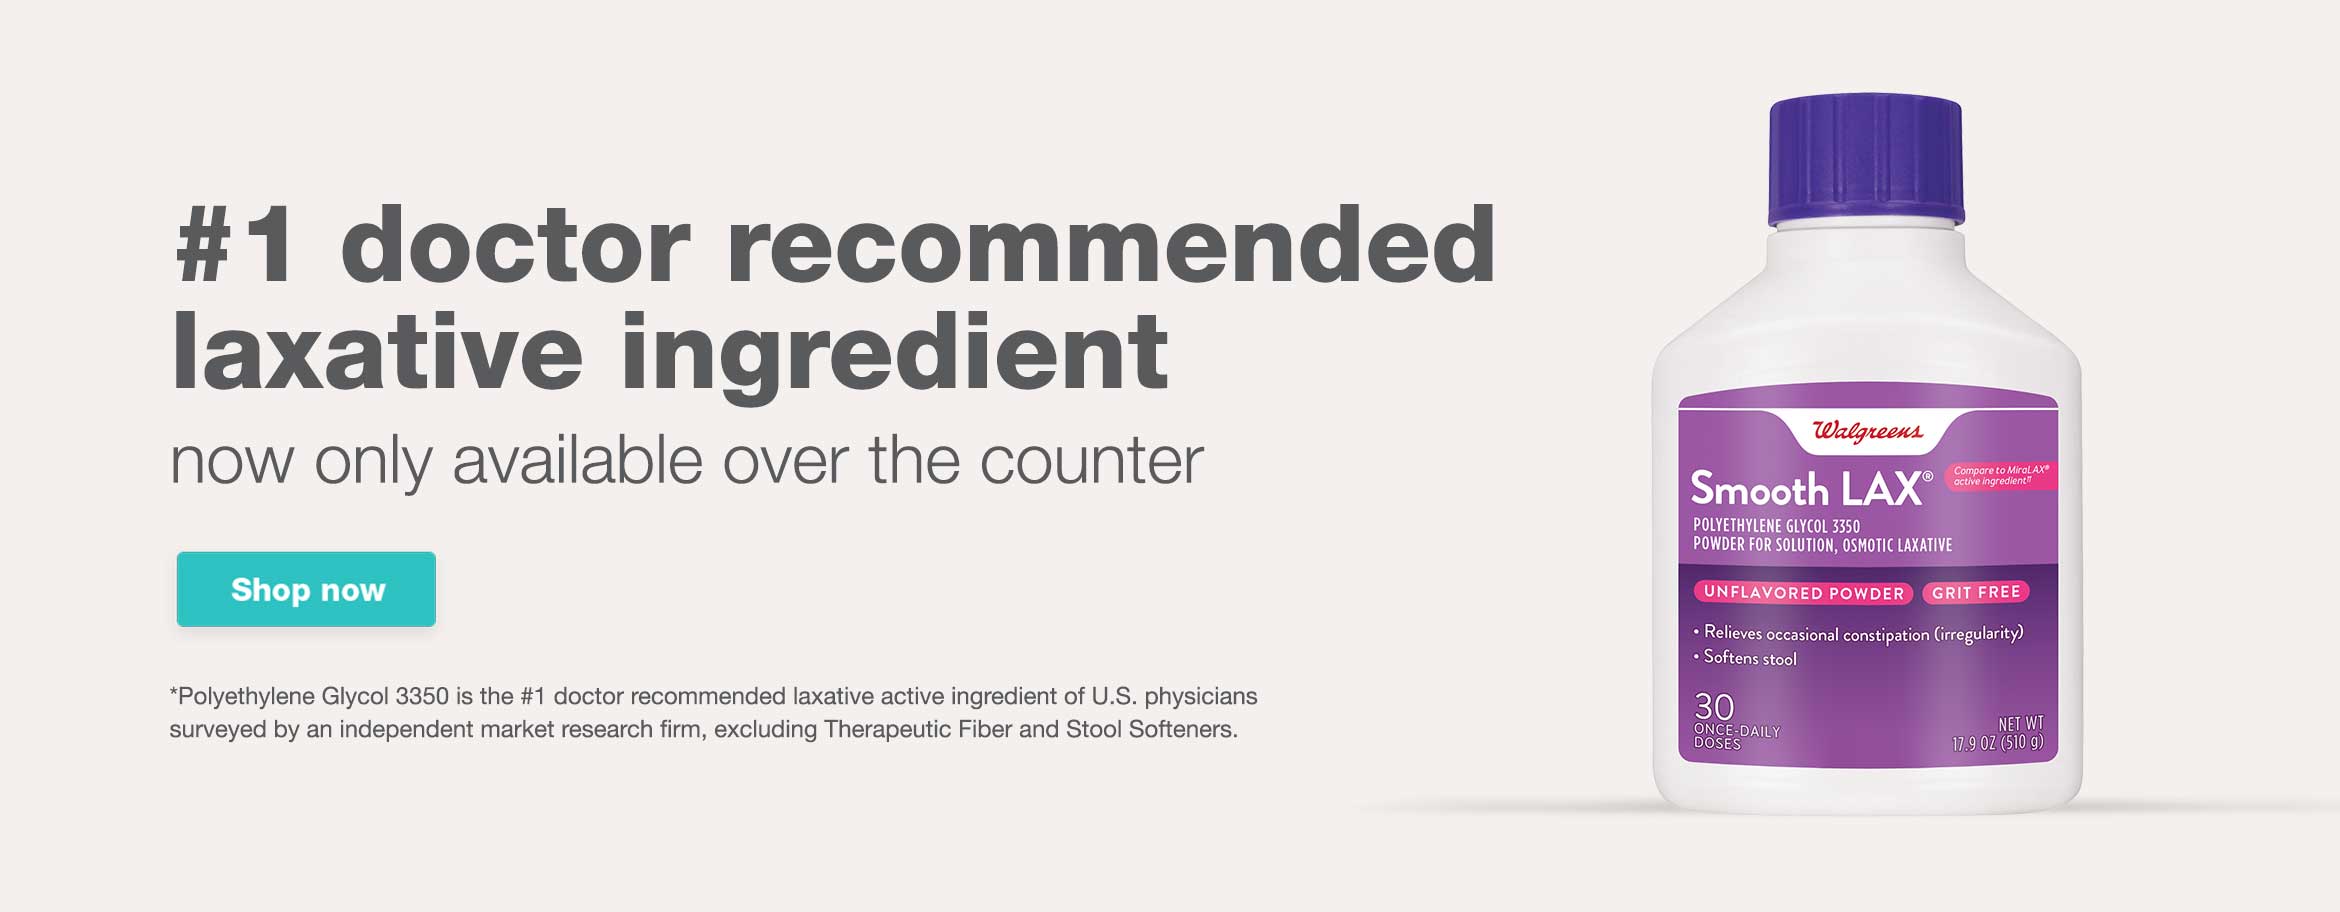 #1 doctor recommended laxative ingredient now only available over the counter. Shop now.